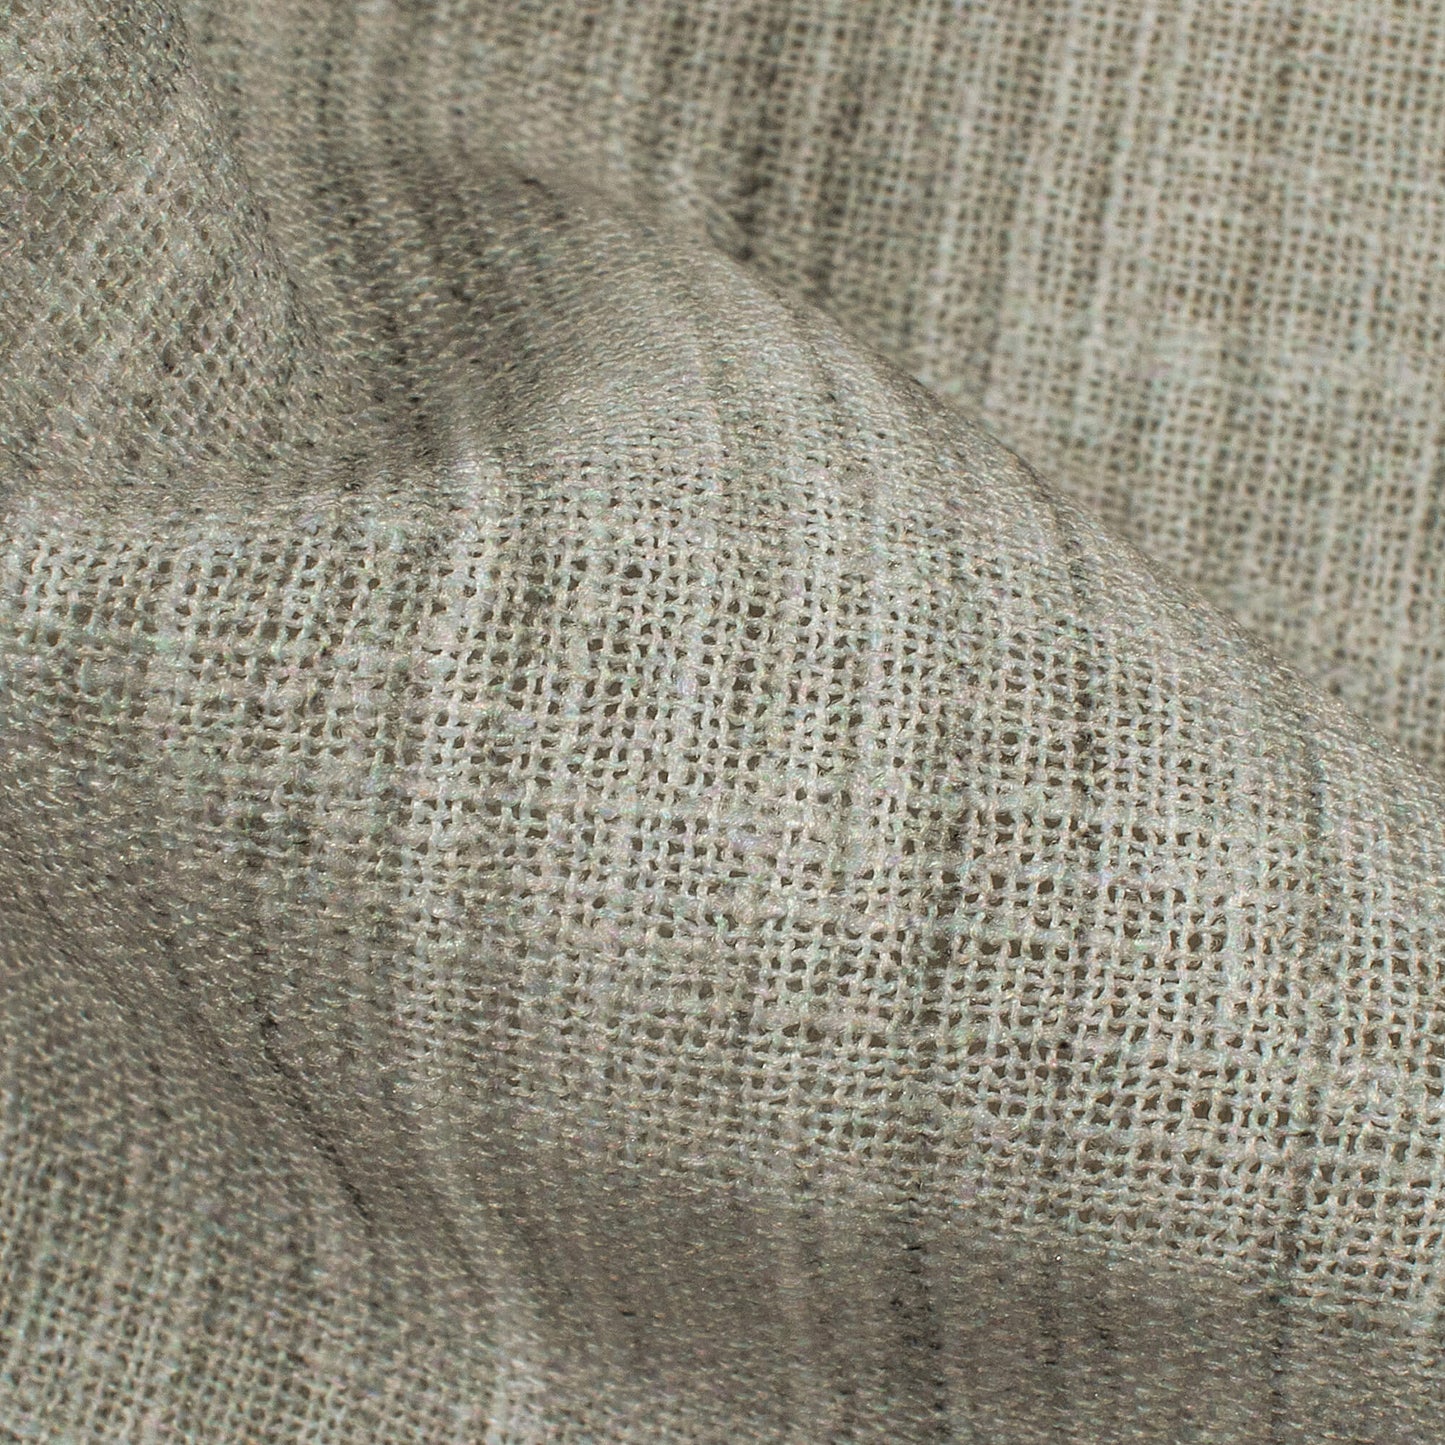 Dolphin Grey Textured Premium Sheer Fabric (Width 54 Inches)